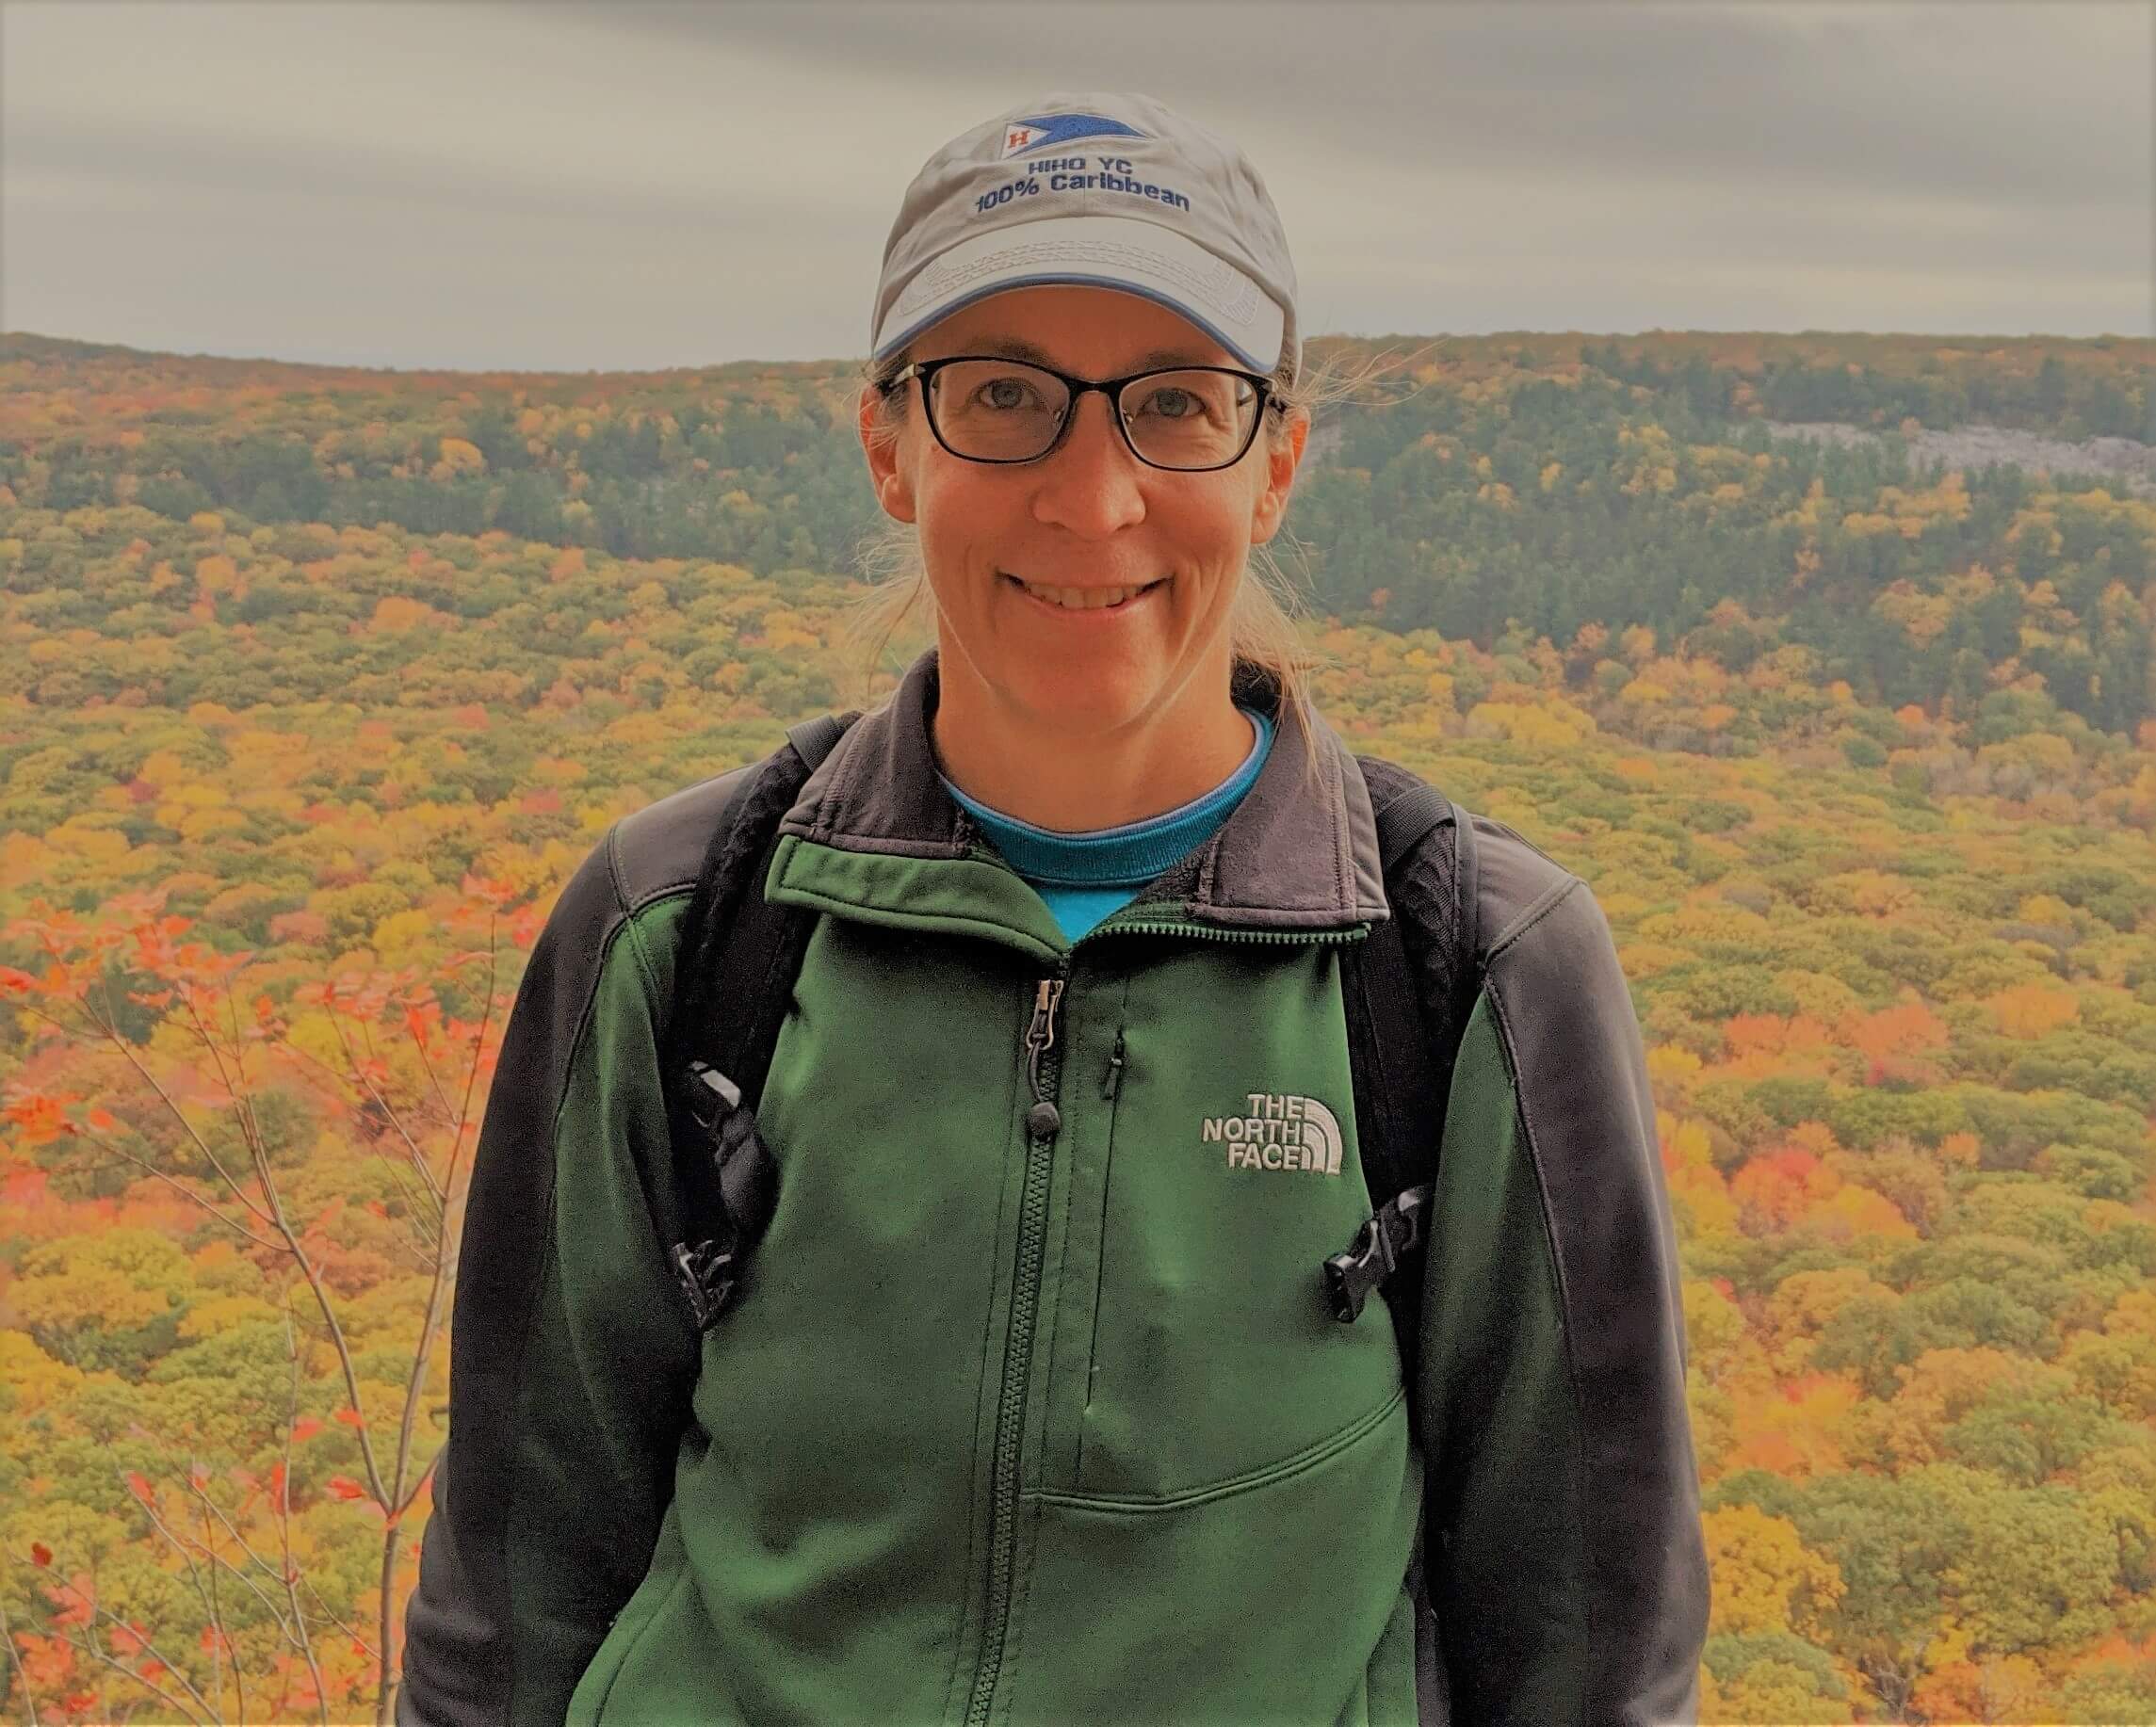 photo of Laura DeCicco with backdrop of treetops in autumn leaf colors